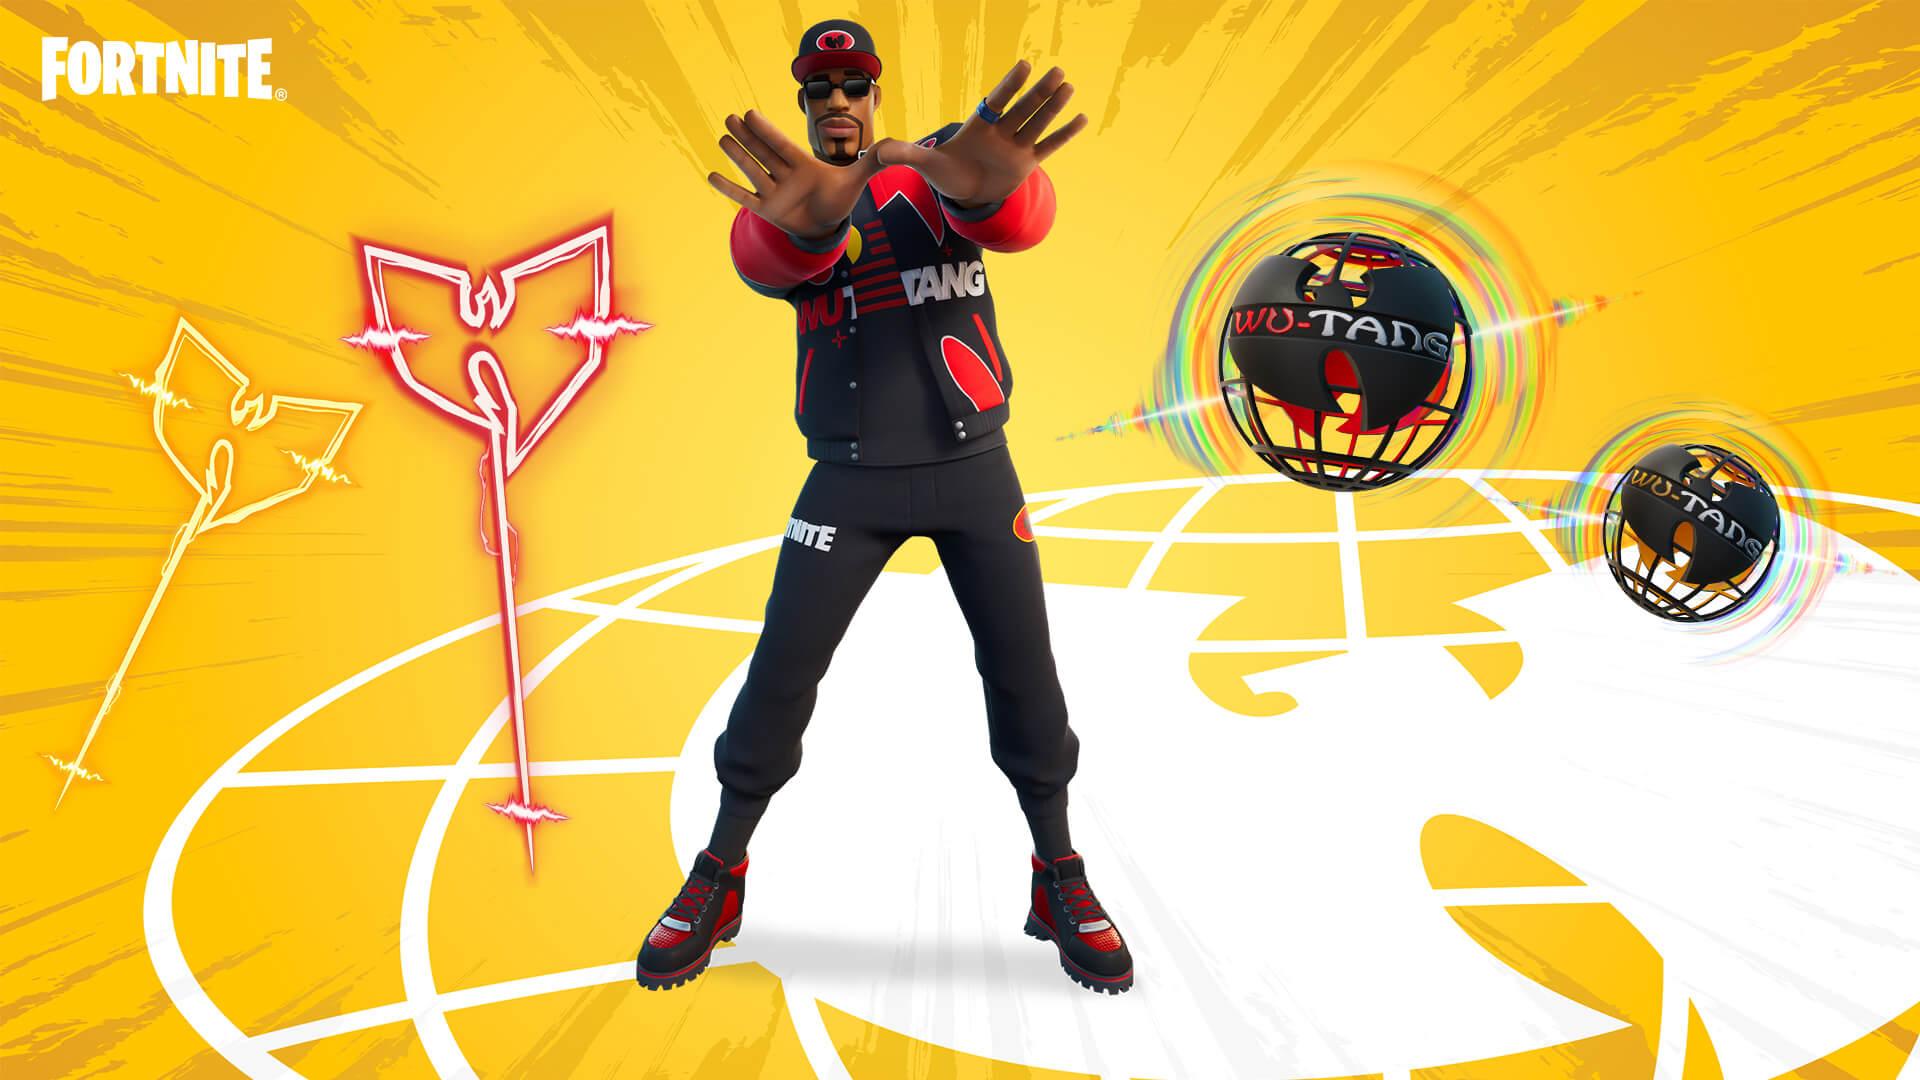 Fortnite Wu-Tang Clan Throwback BG Outfit and Items